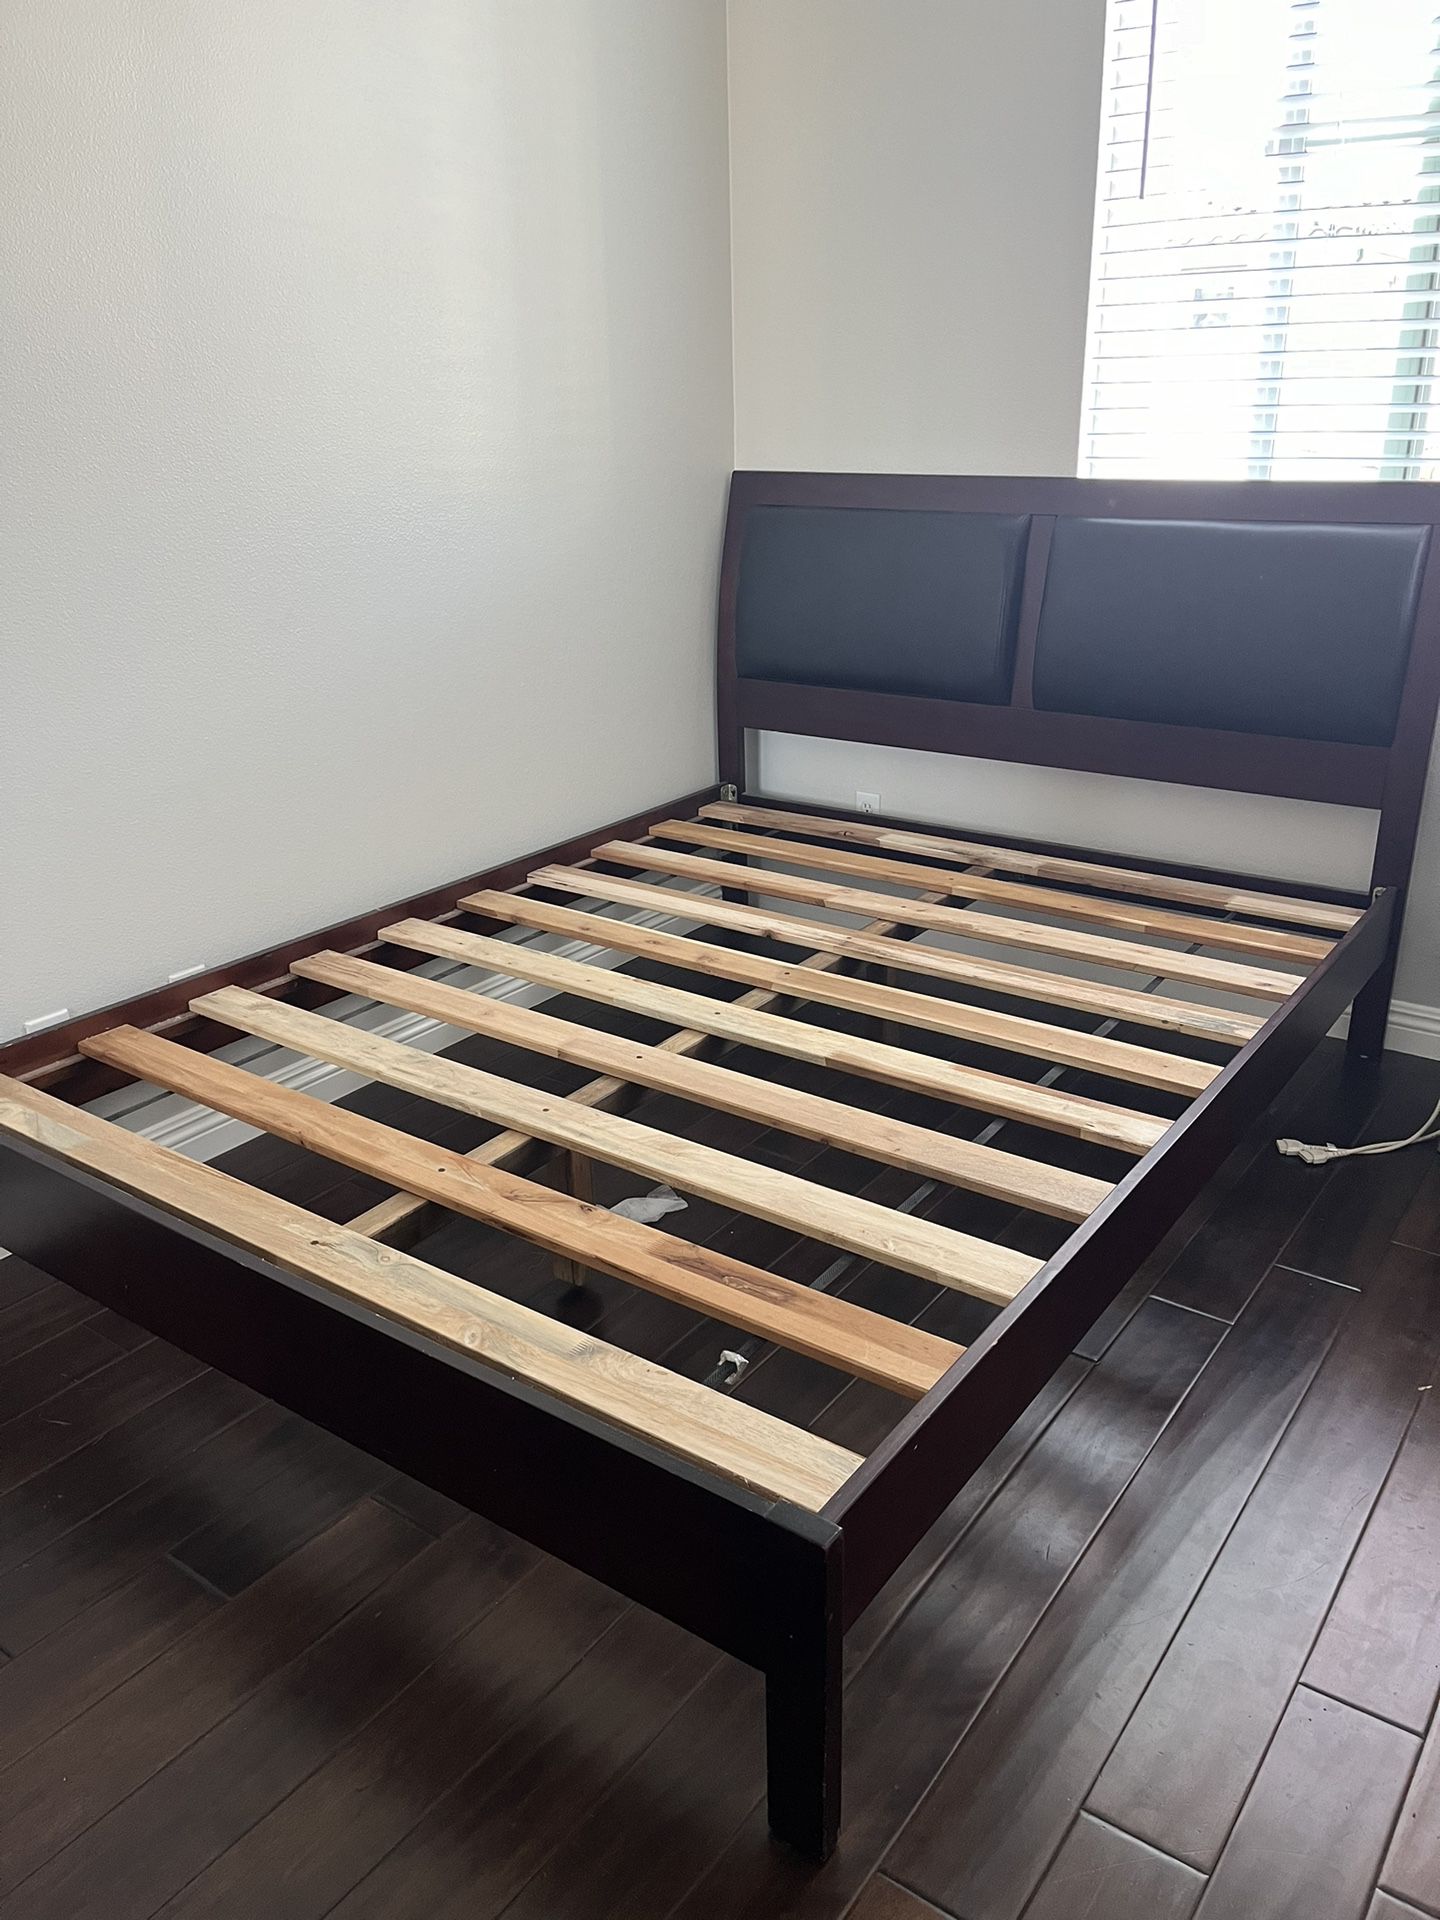 queen size bed frame 